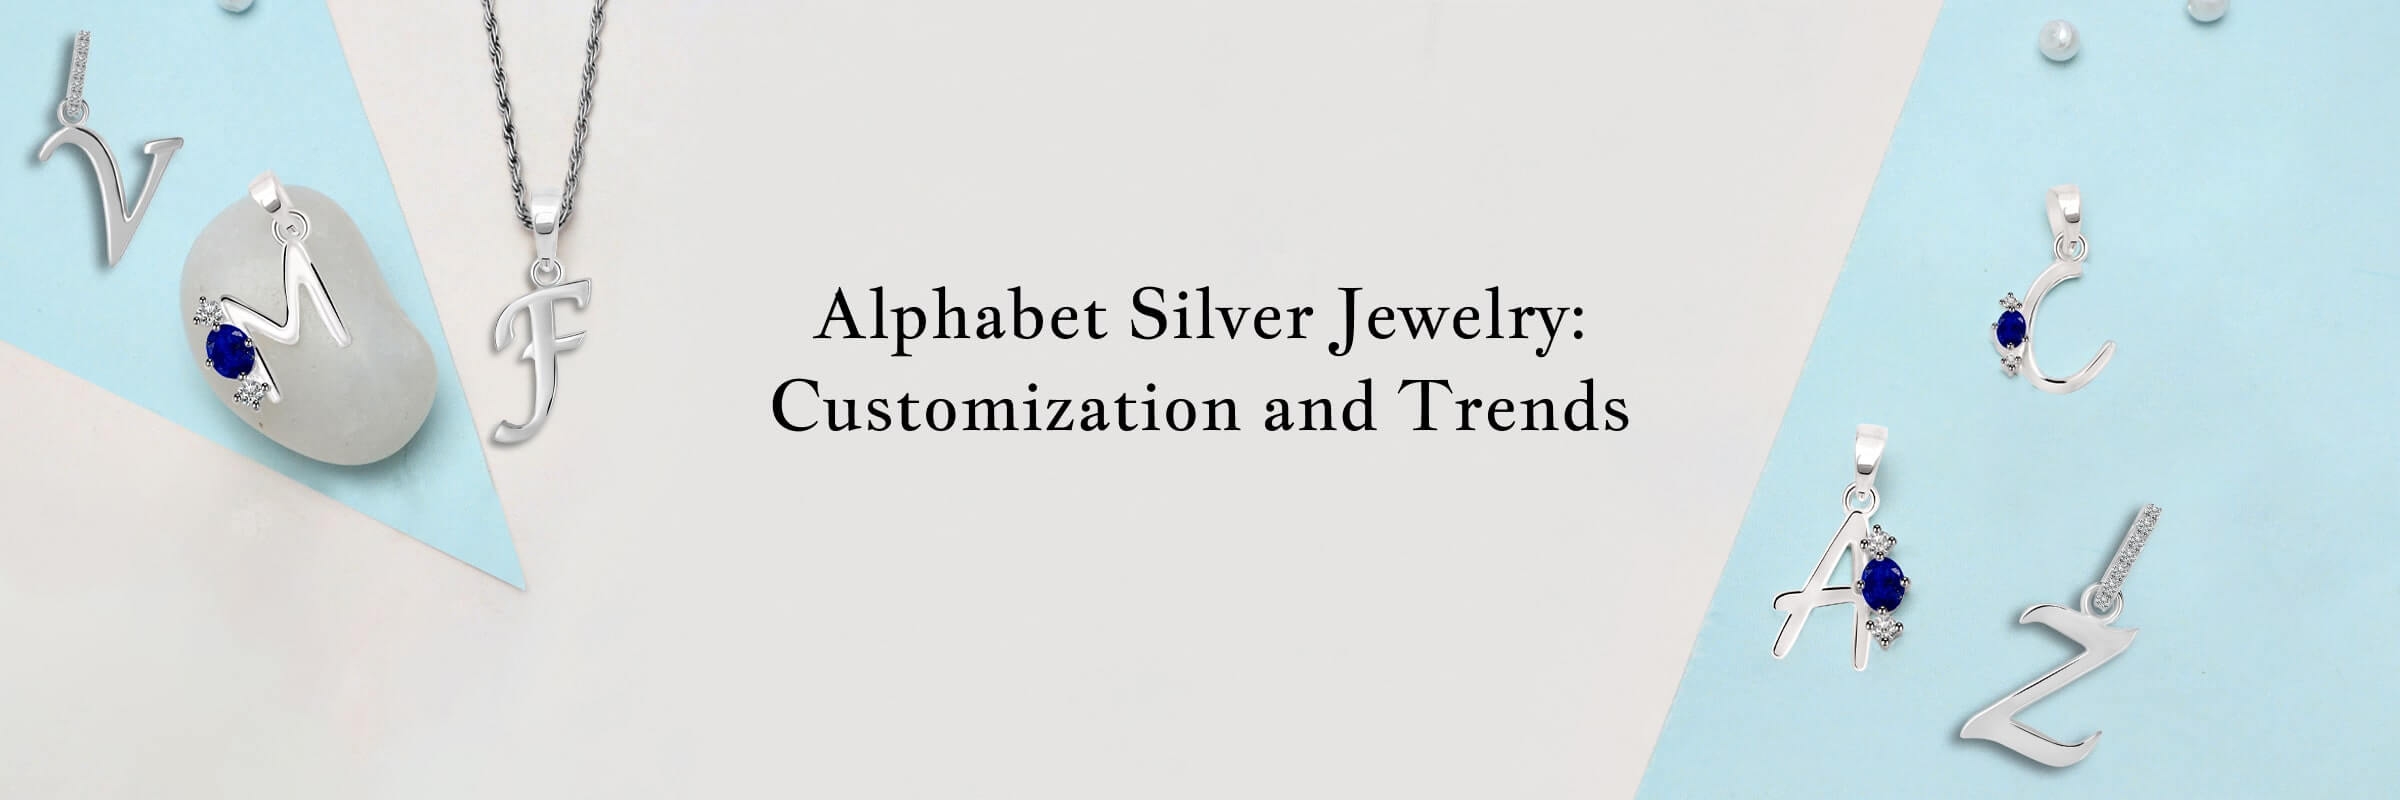 Customization and current trends of Alphabet Jewelry